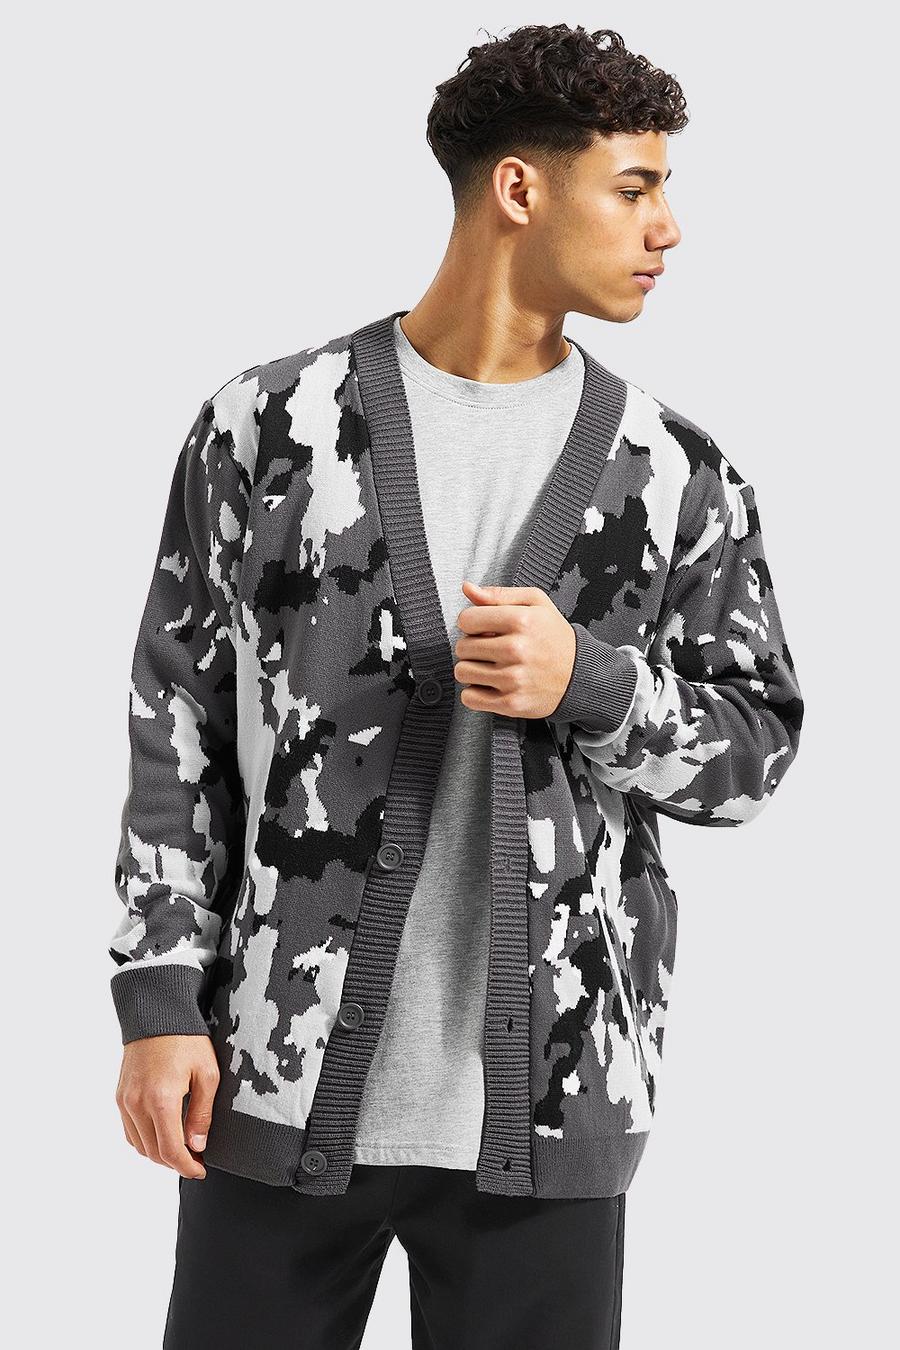 Charcoal grey Oversized Camo Knitted Cardigan